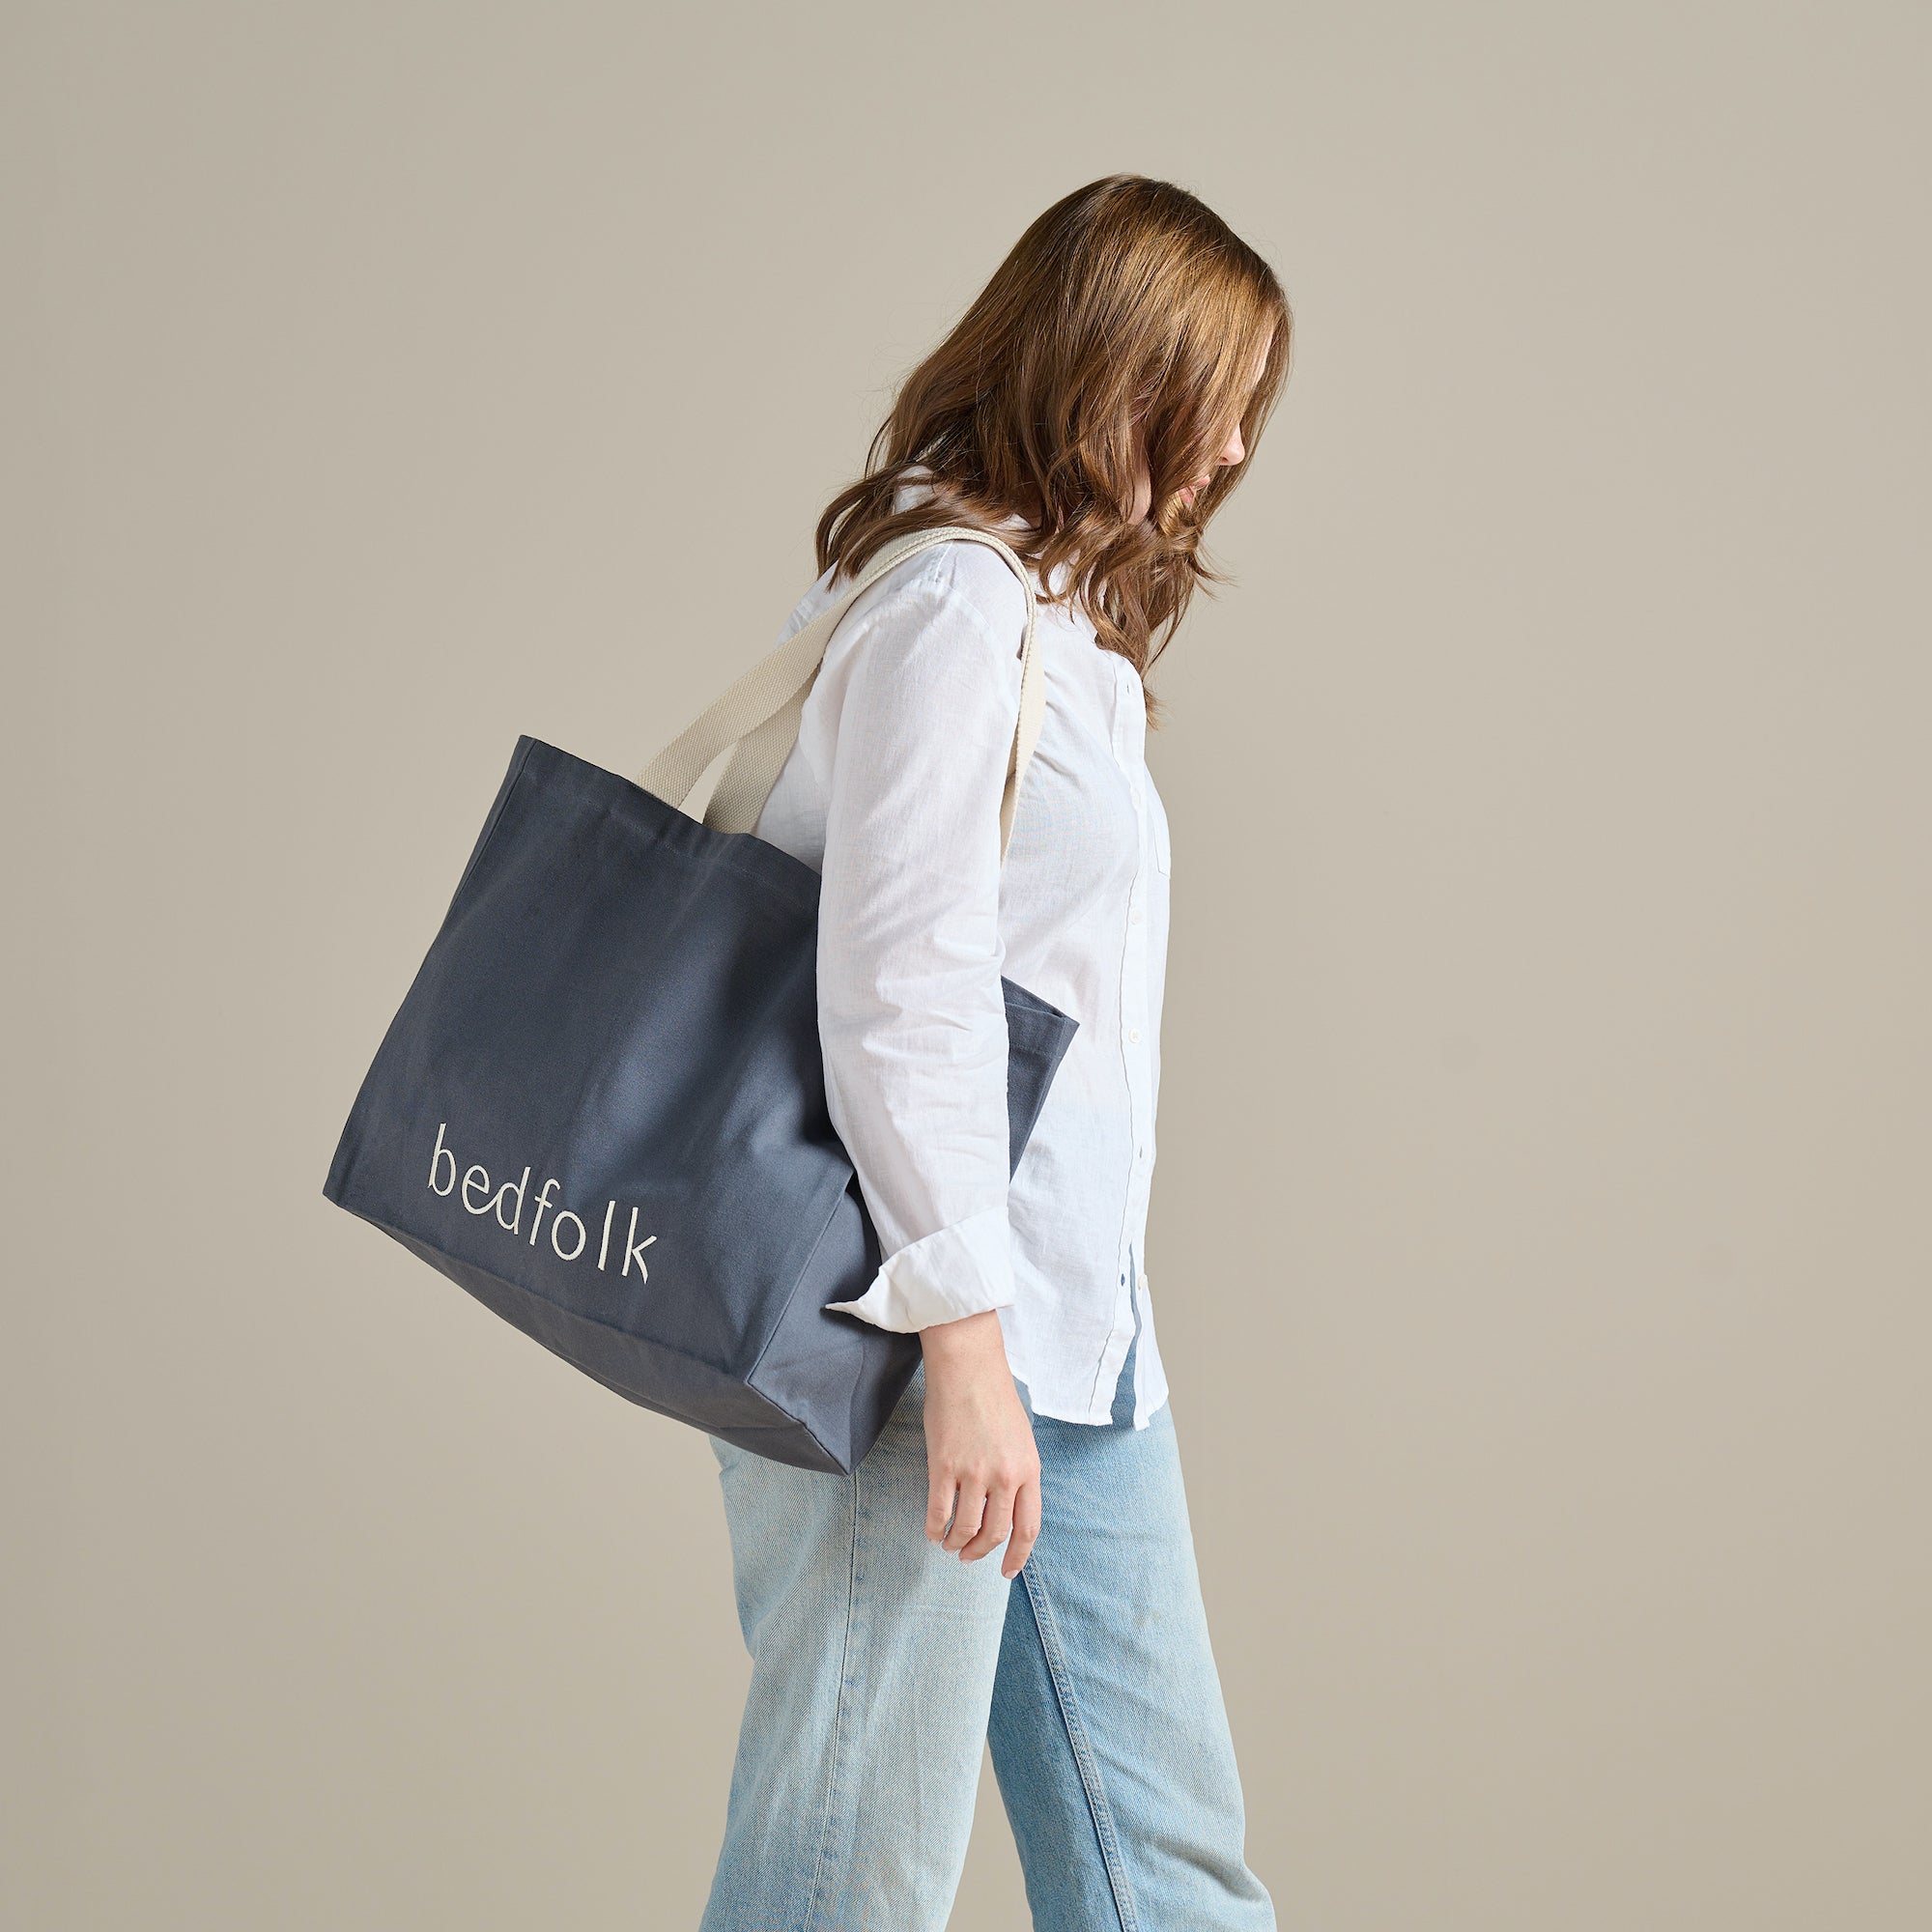 The Bedfolk Tote